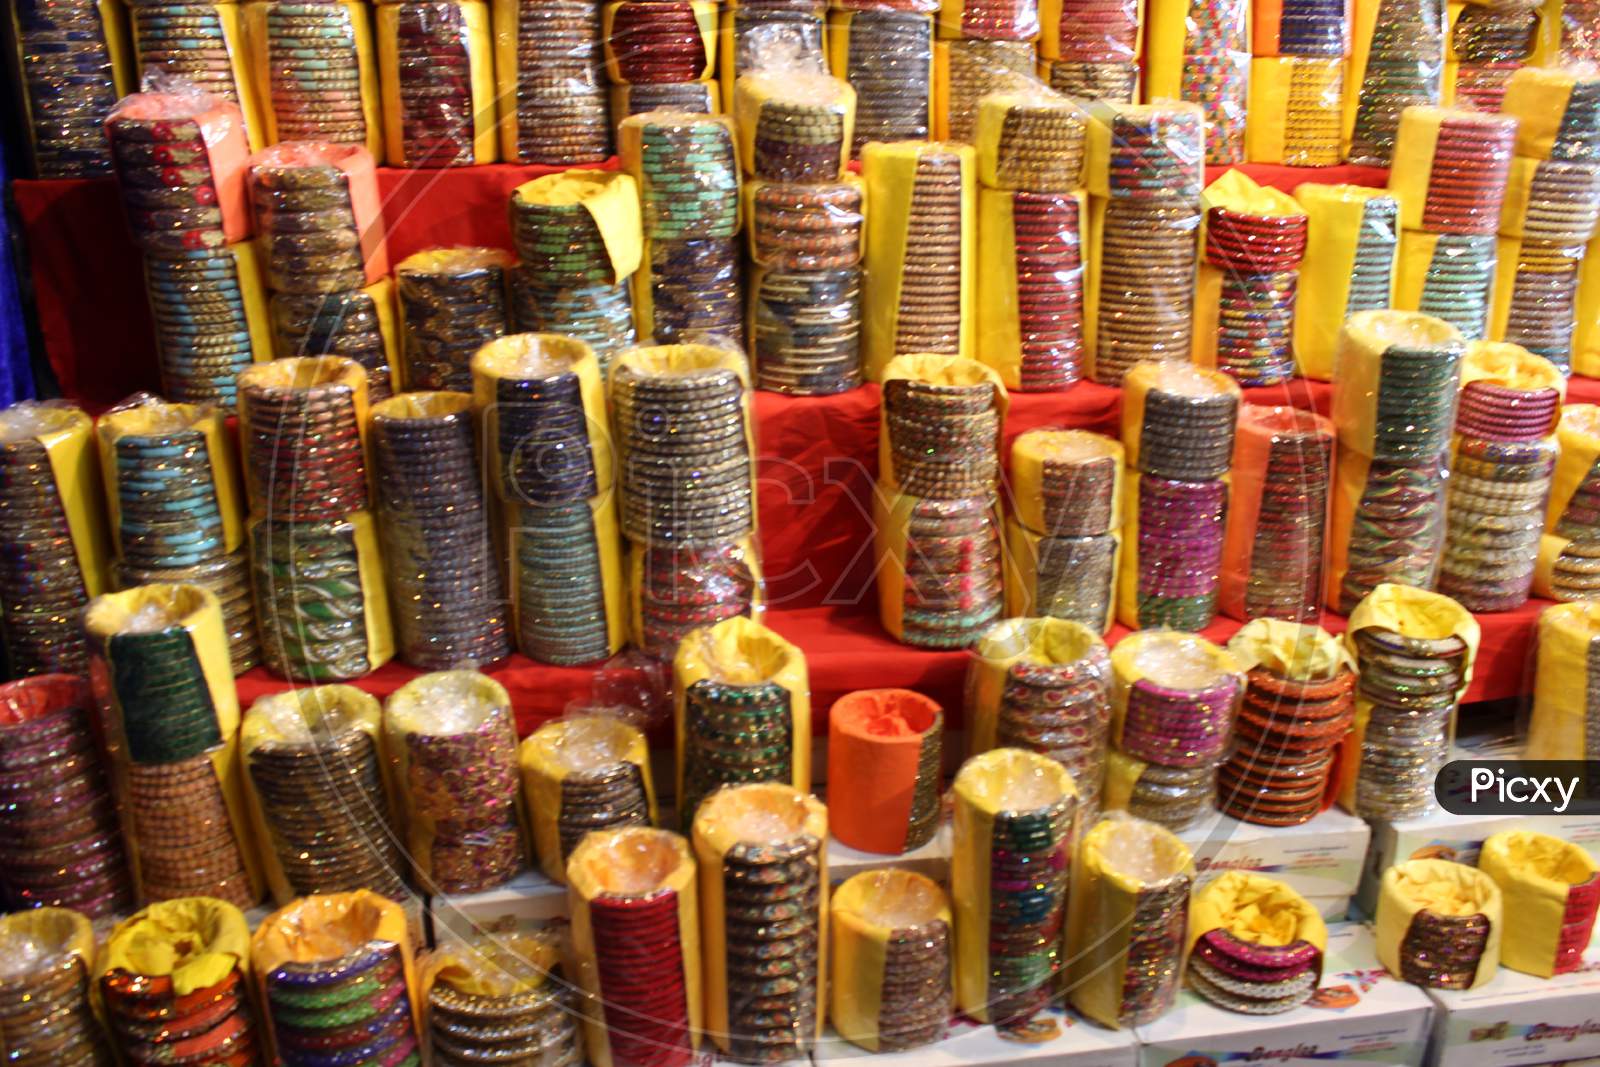 Background Of Colorful Bangles Stacked In A Shop In India With Glitter And Plain Colored Bangles. The Bangles Are Made Of Glass, Metal Or Lac And Worn Regularly Or On Special Occasions By Indian Women